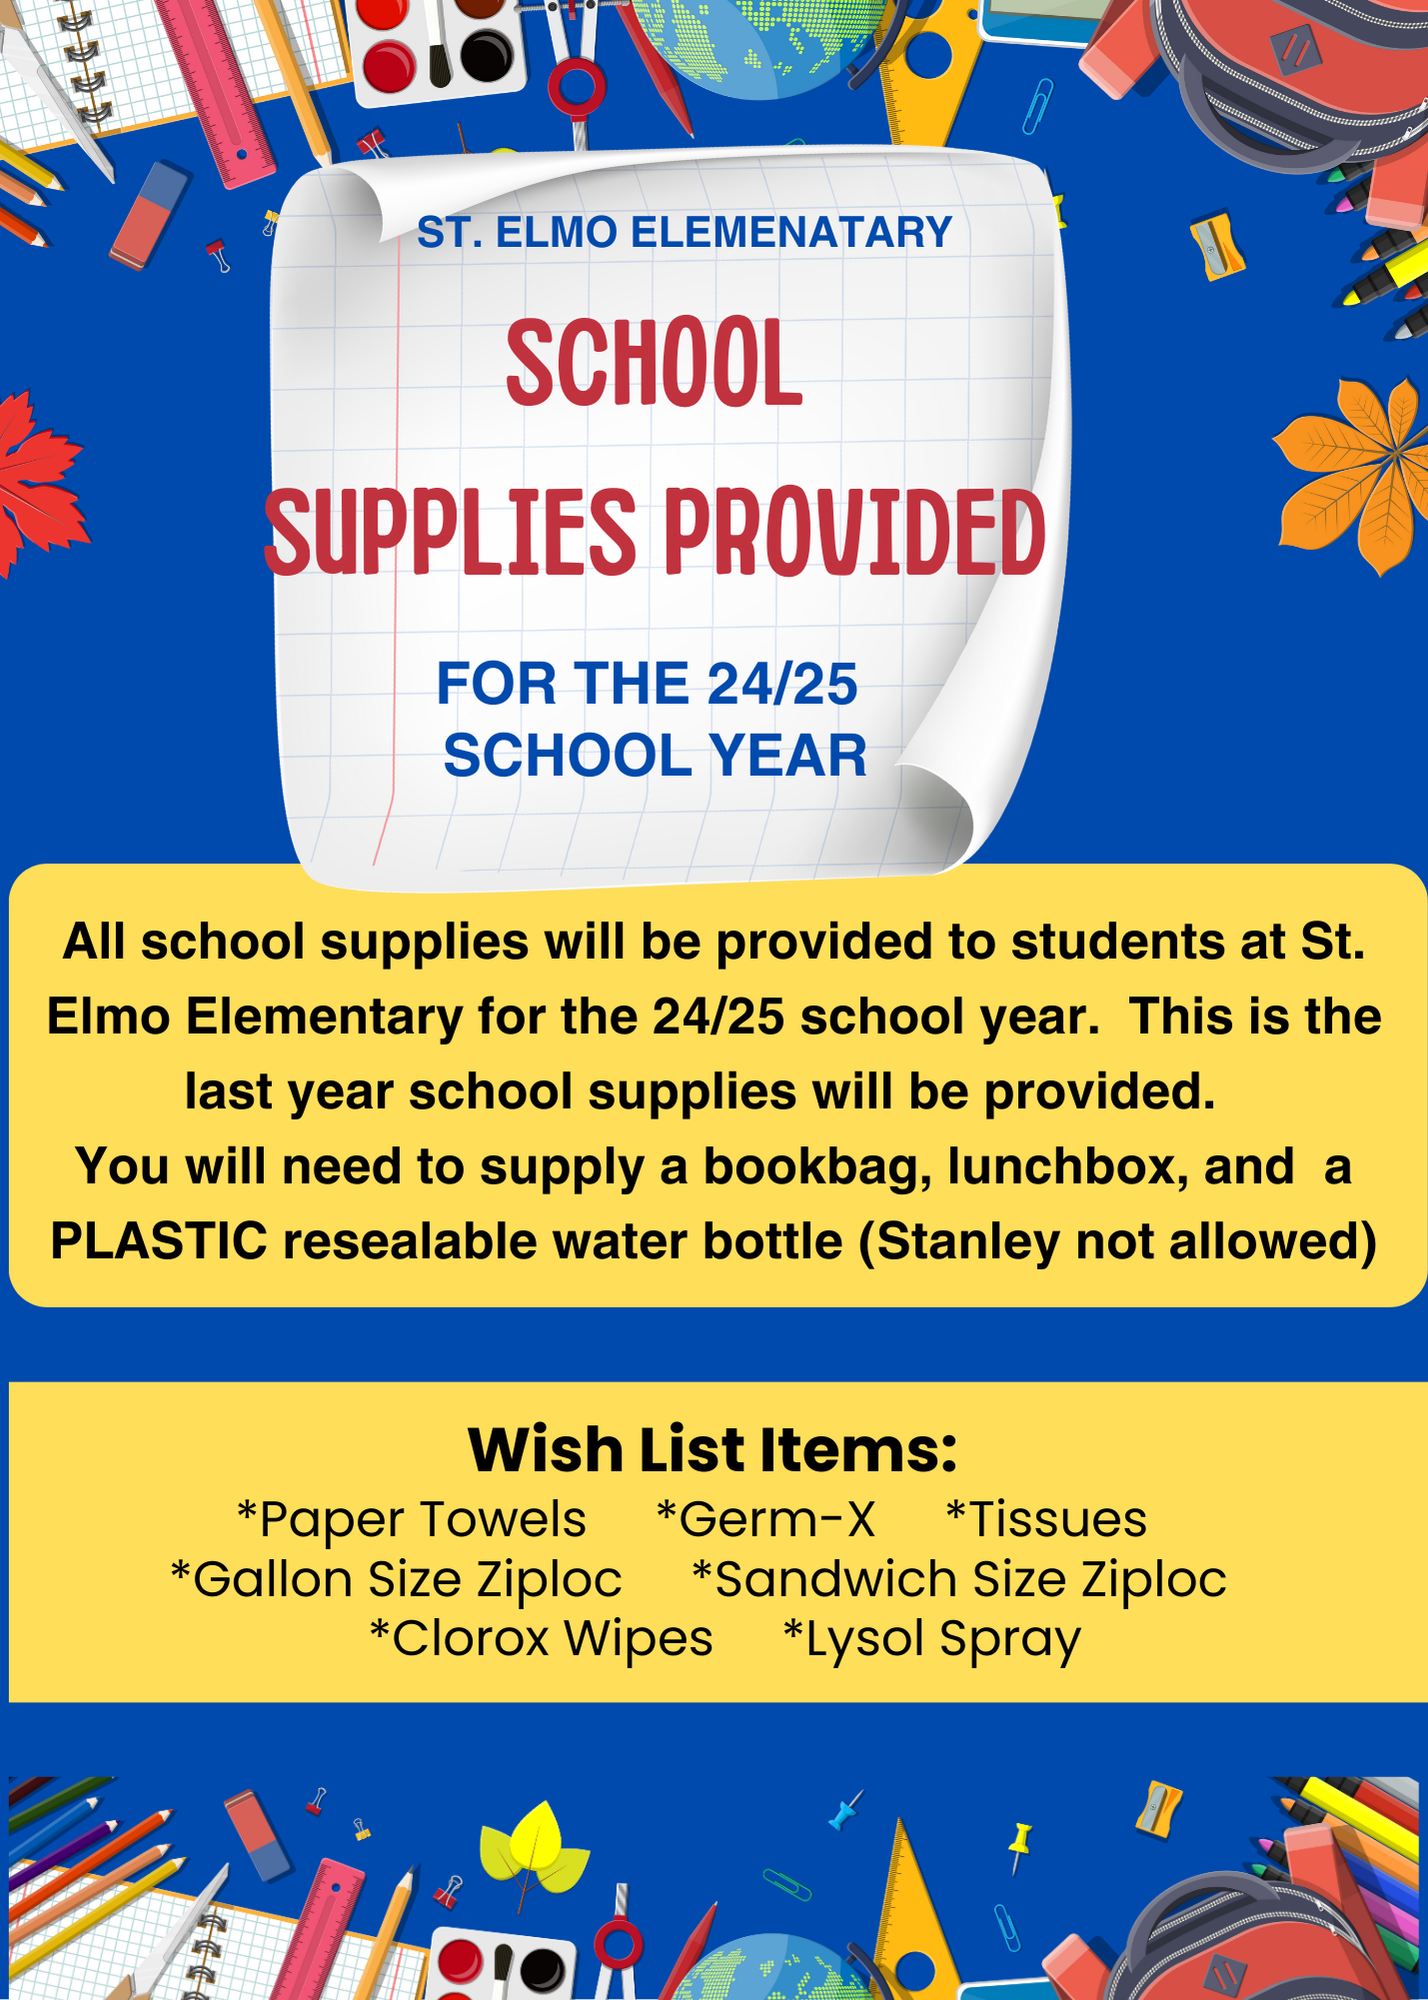 School Supplies Provided for the 24/25 school year.